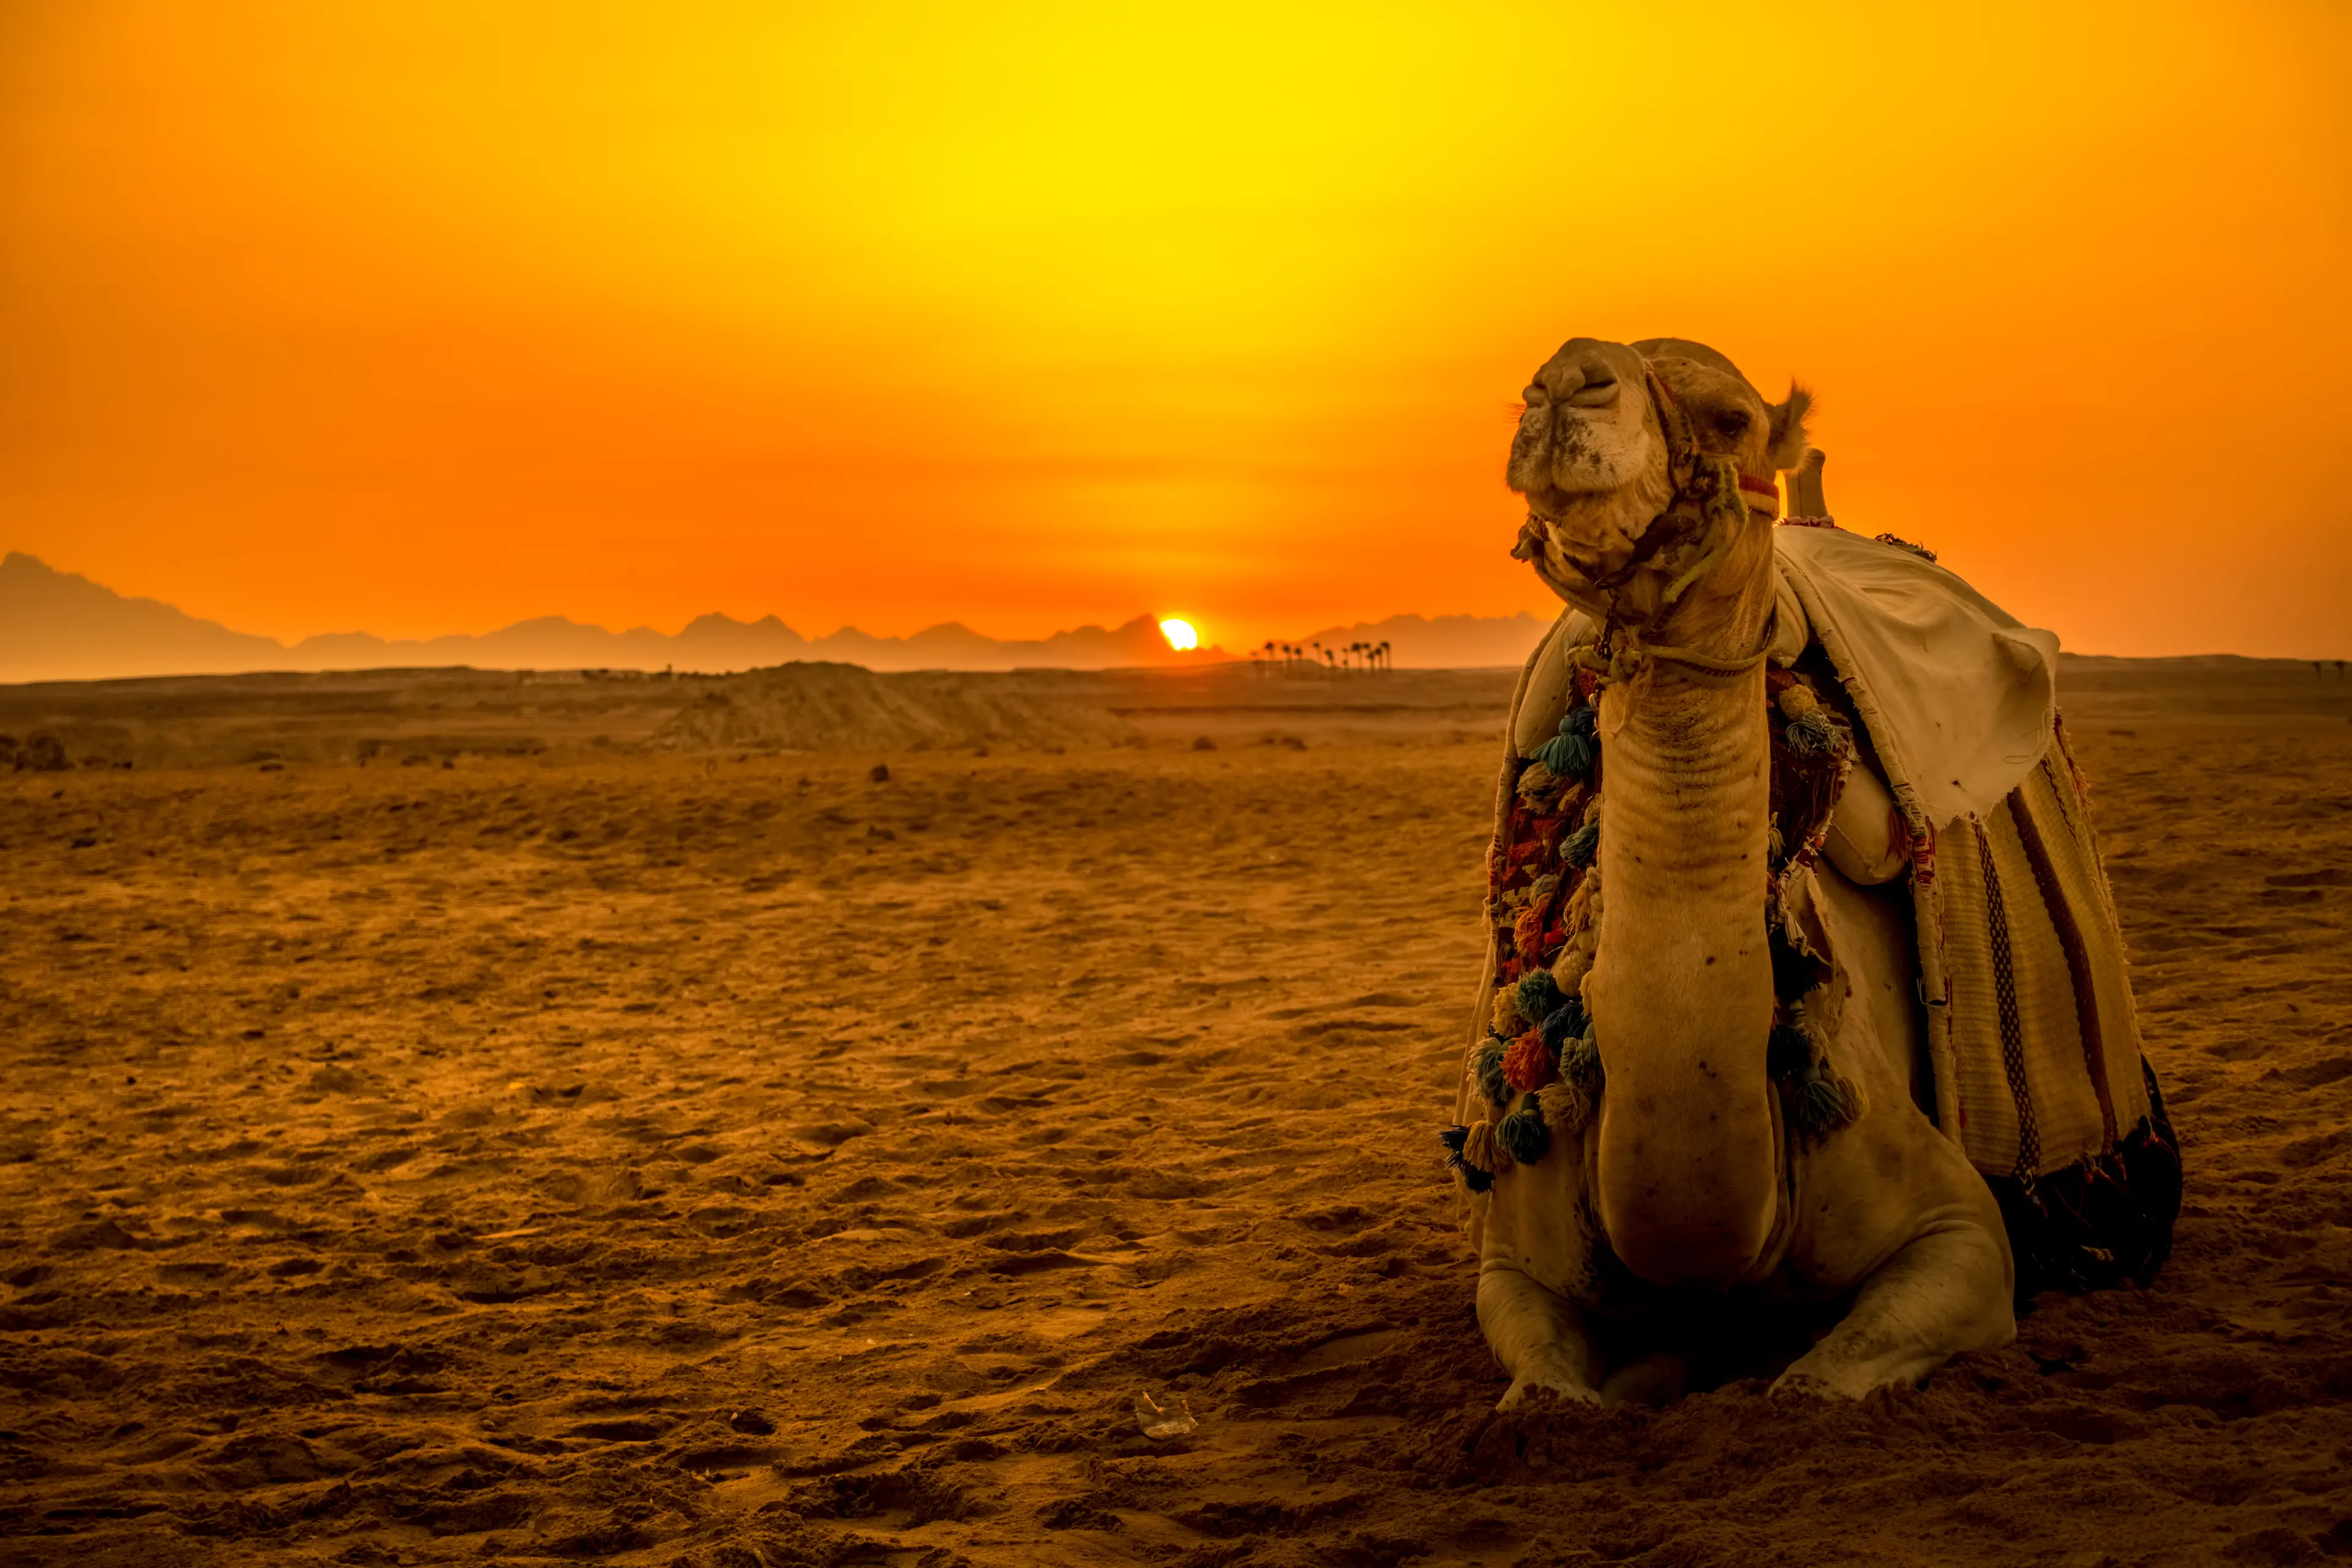 Camel lounging in the sand